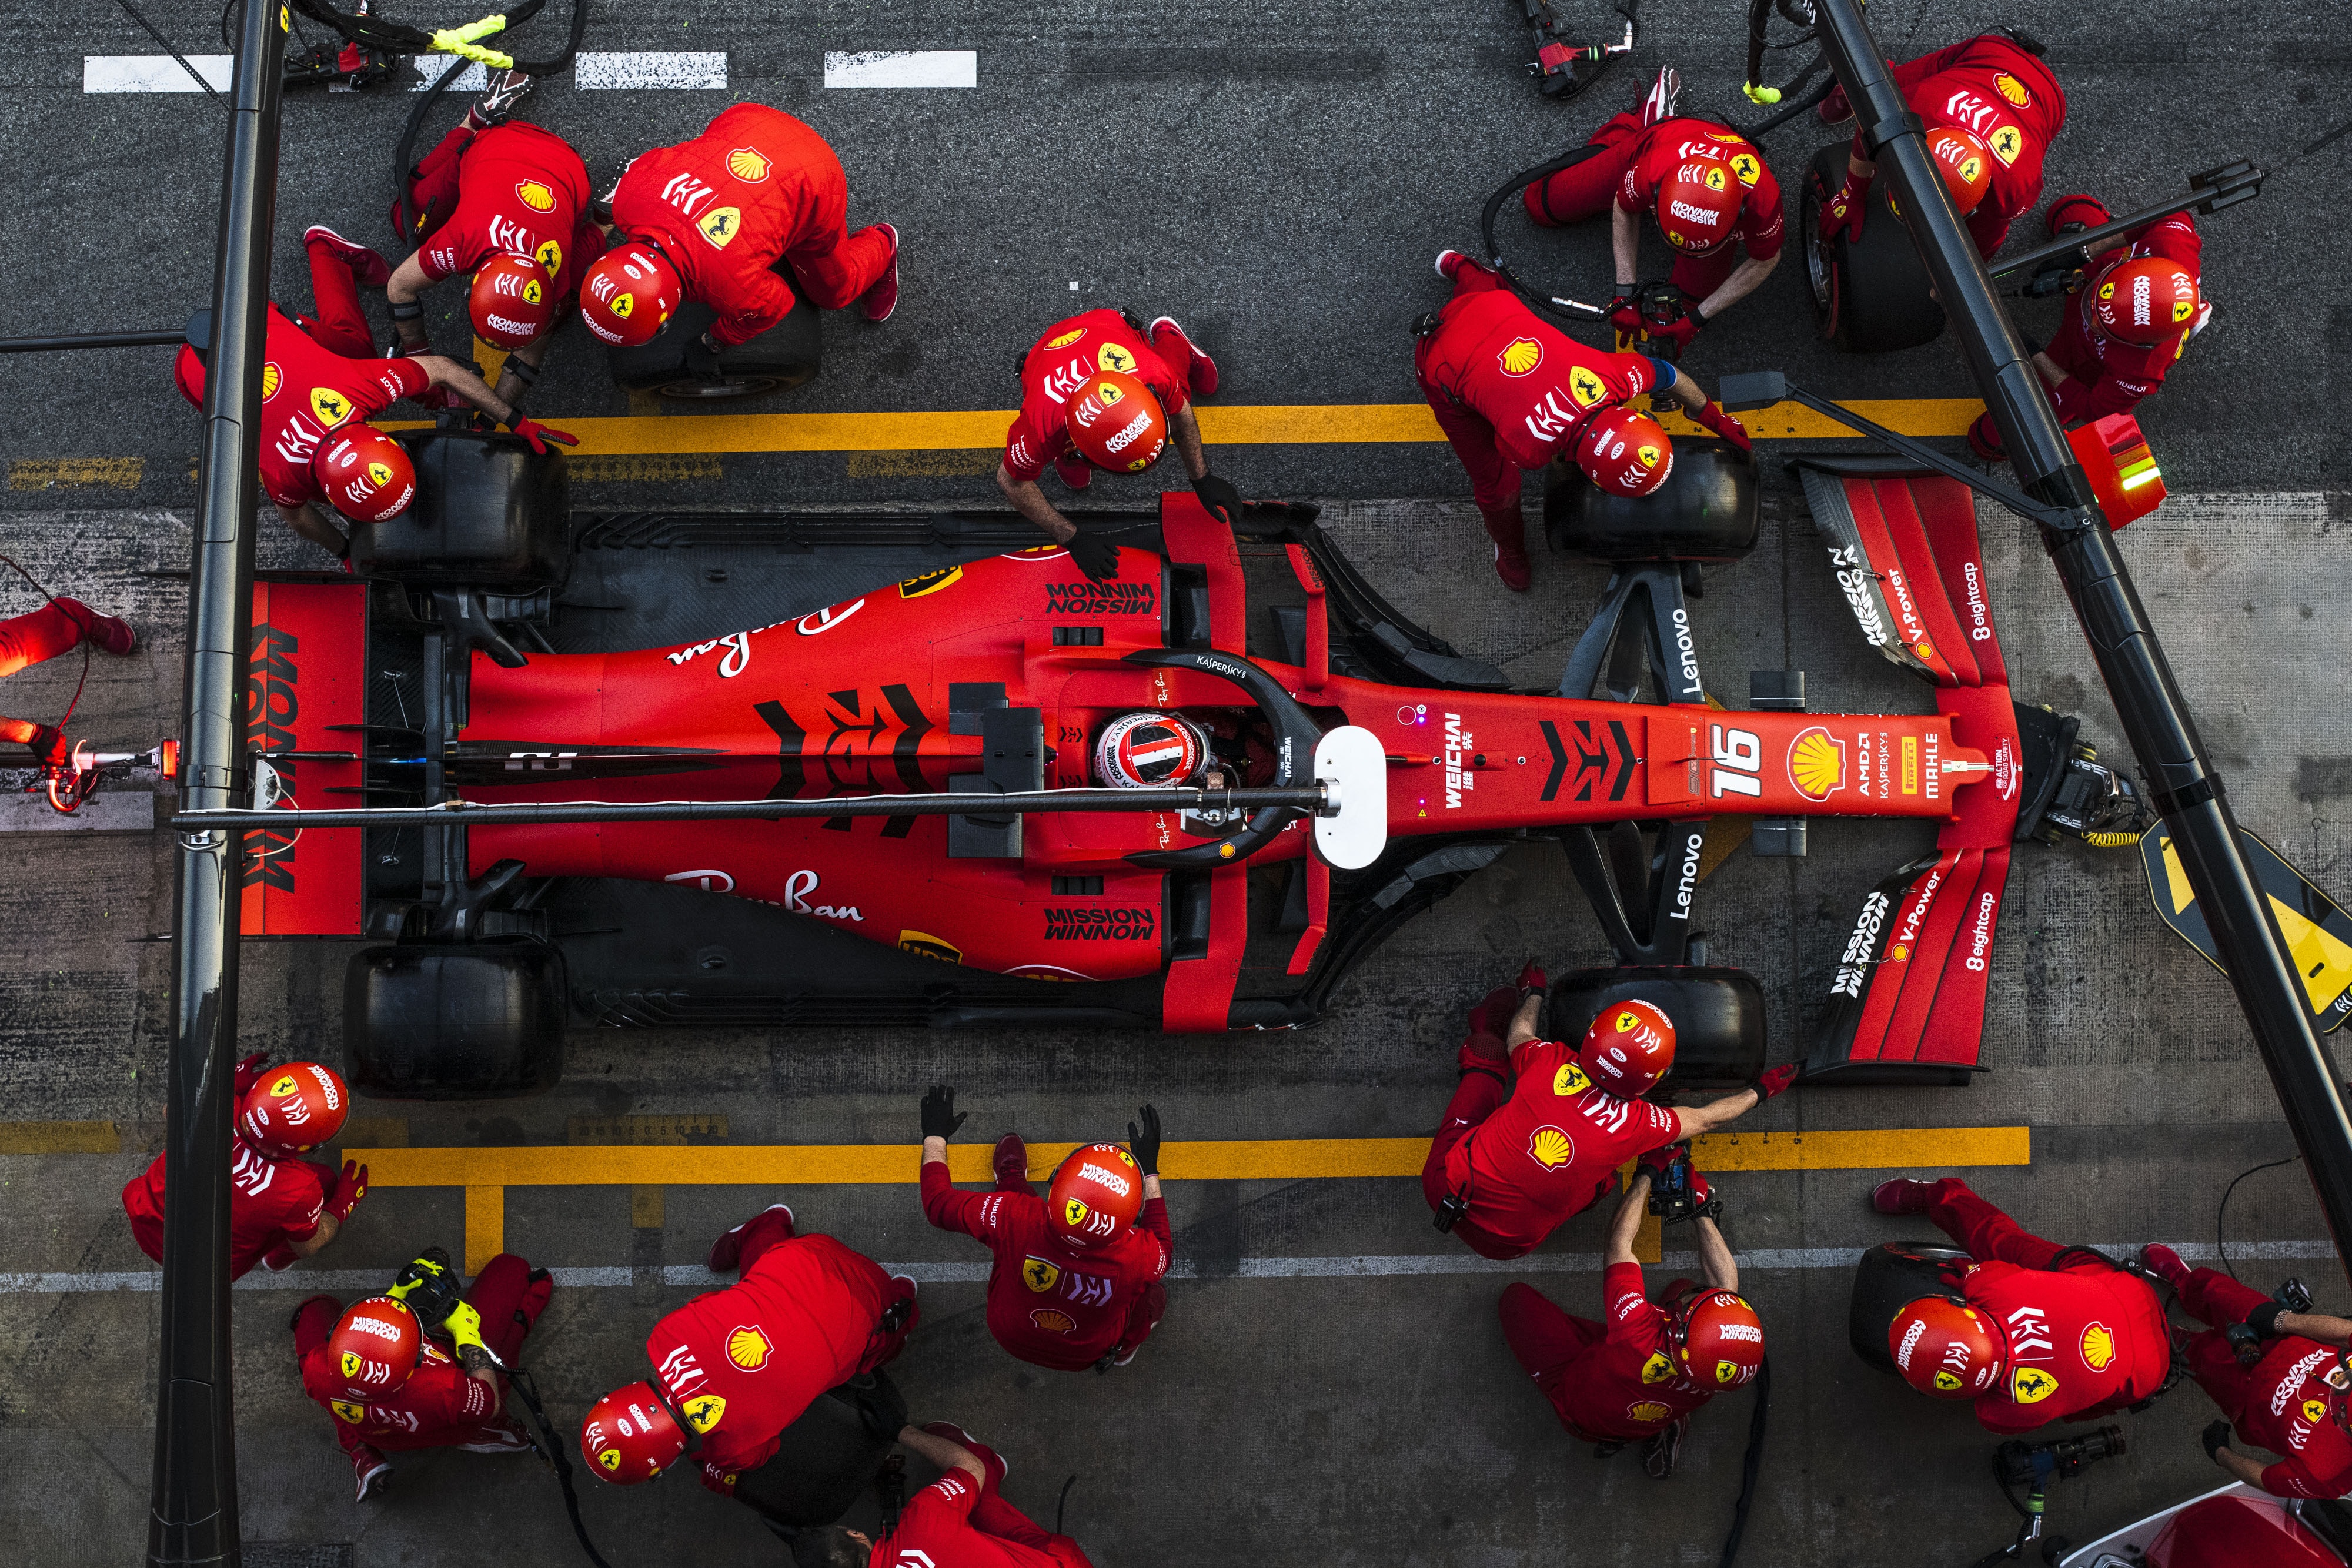 A red Formula 1-style racecar being worked on by pit crew, all in red uniforms